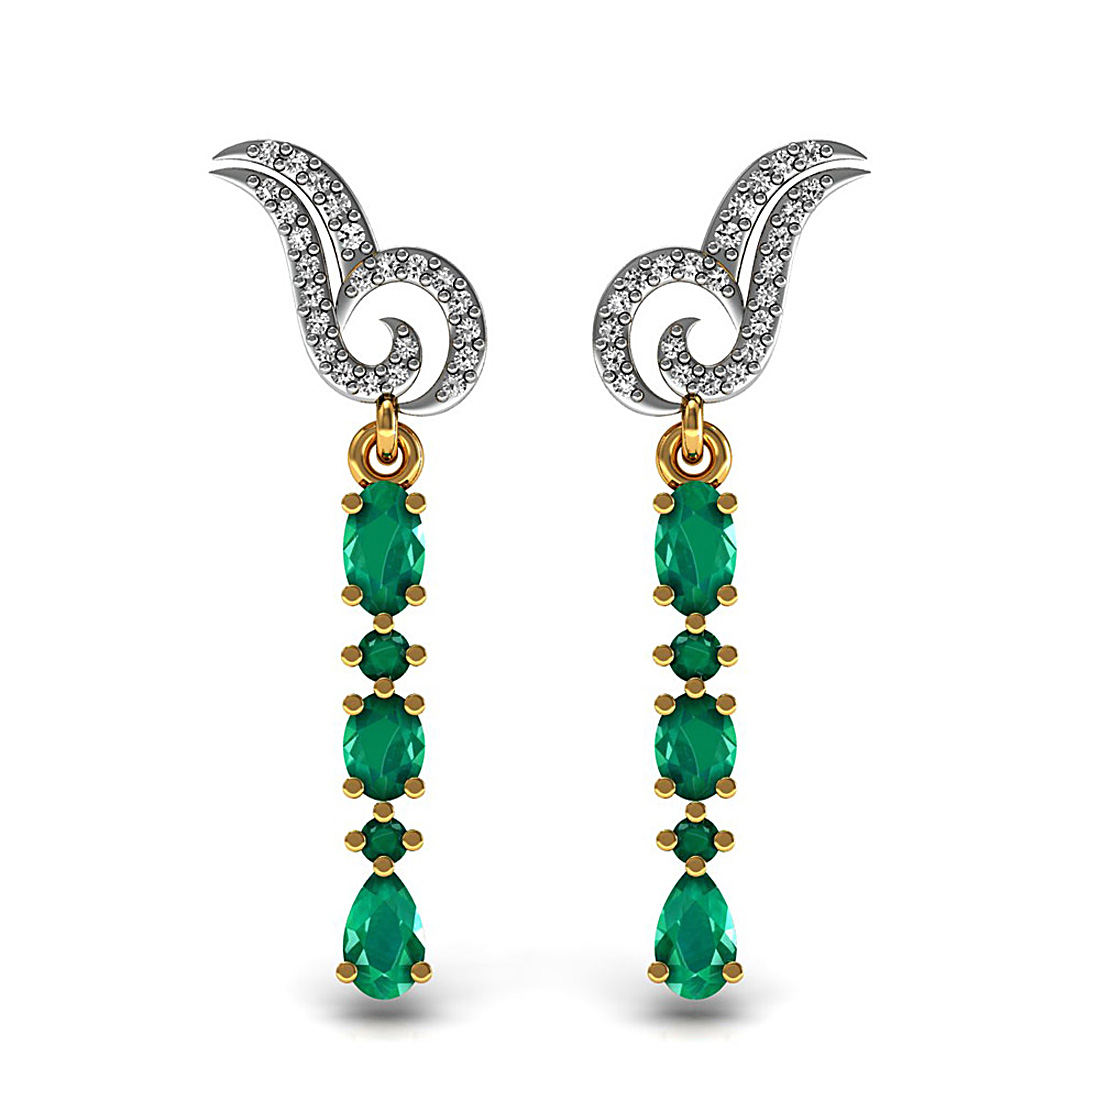 Natural emerald gemstone fine dangle earrings made in 18k solid yellow gold adorned with real diamond.